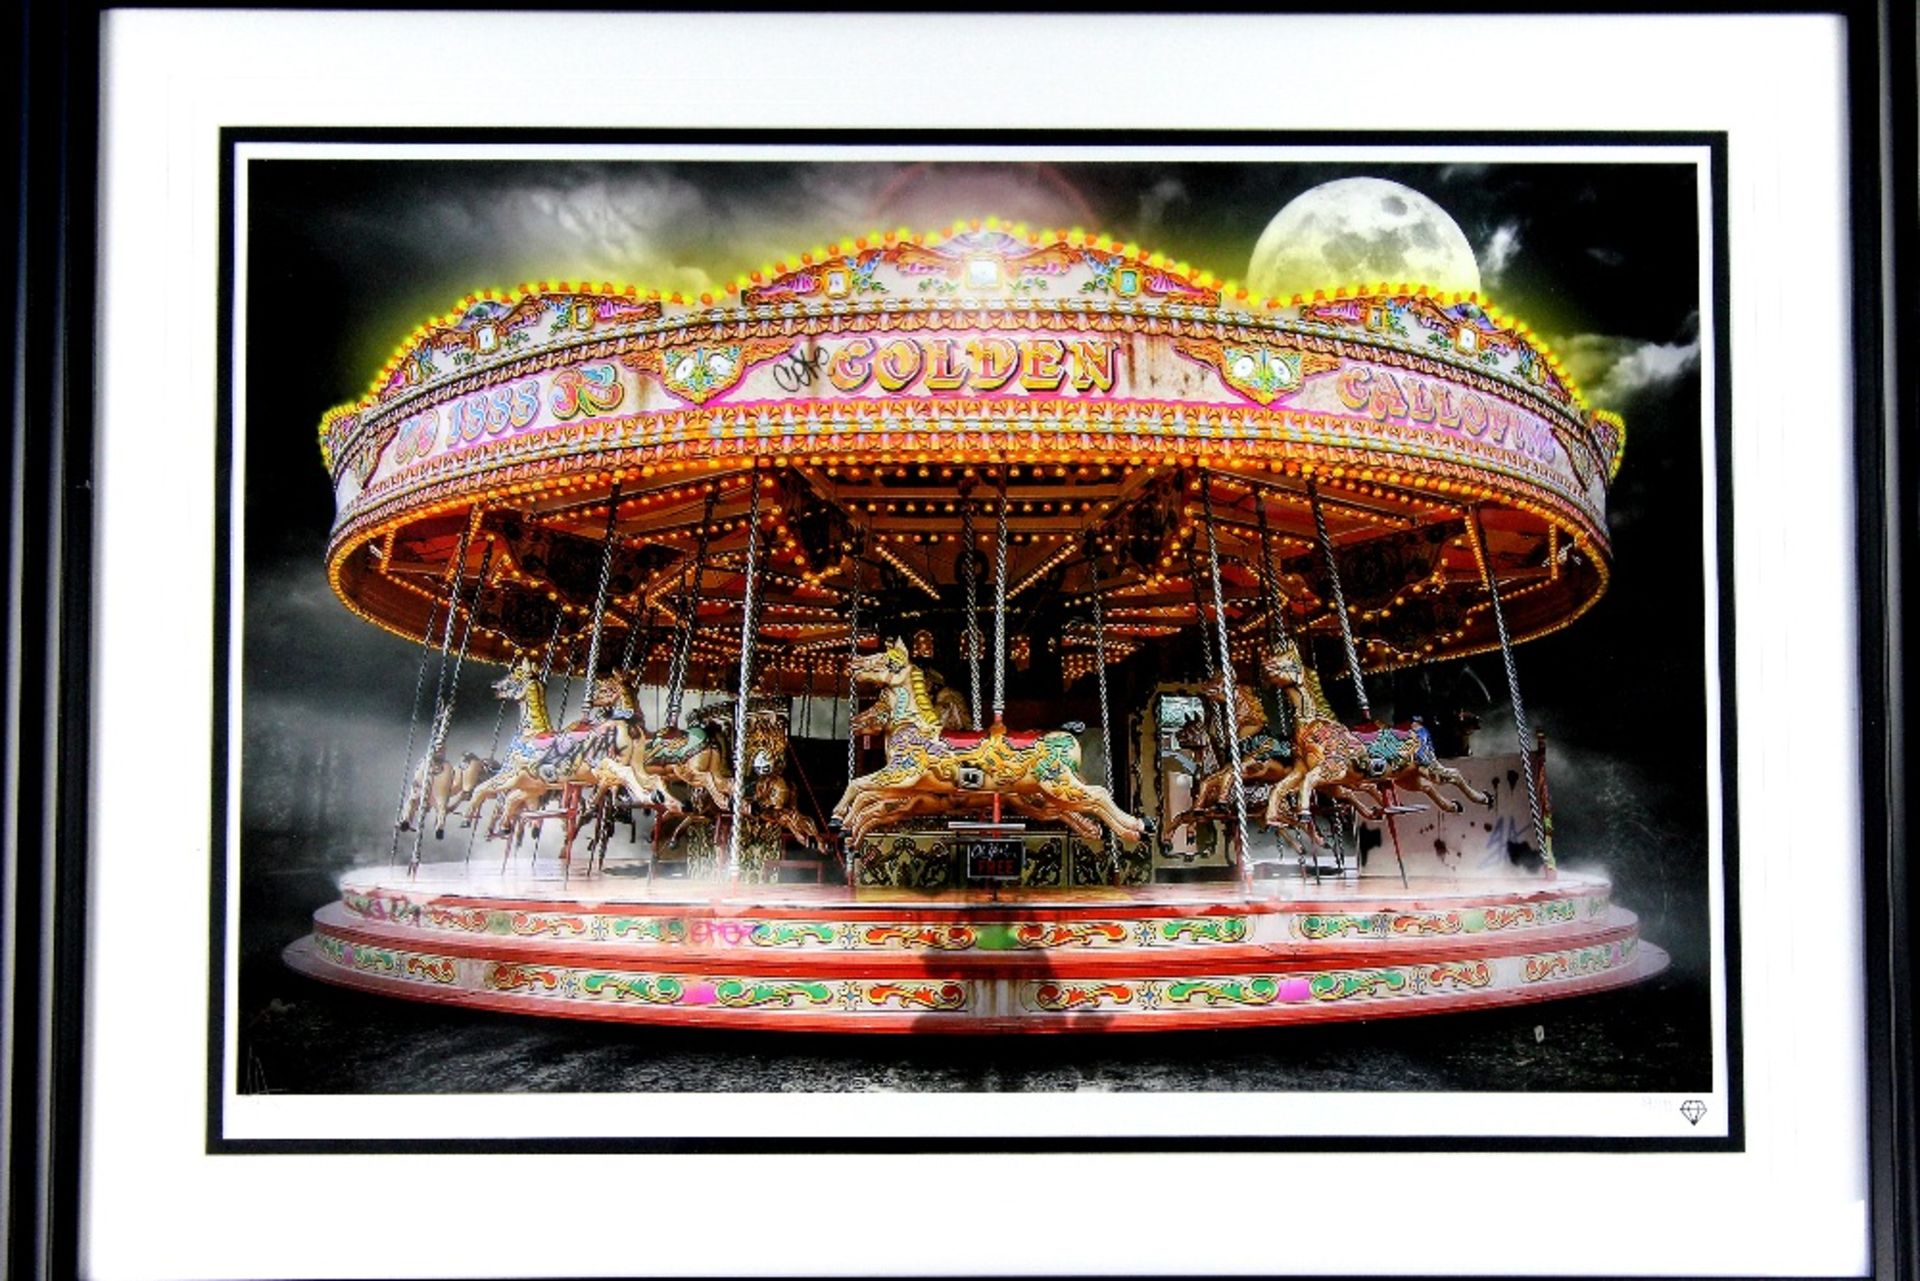 JJ Adams Ltd edition 84/195 "The Carousel",Wishbone, Framed and In Original packaging 42 x 32 Inch - Image 4 of 5